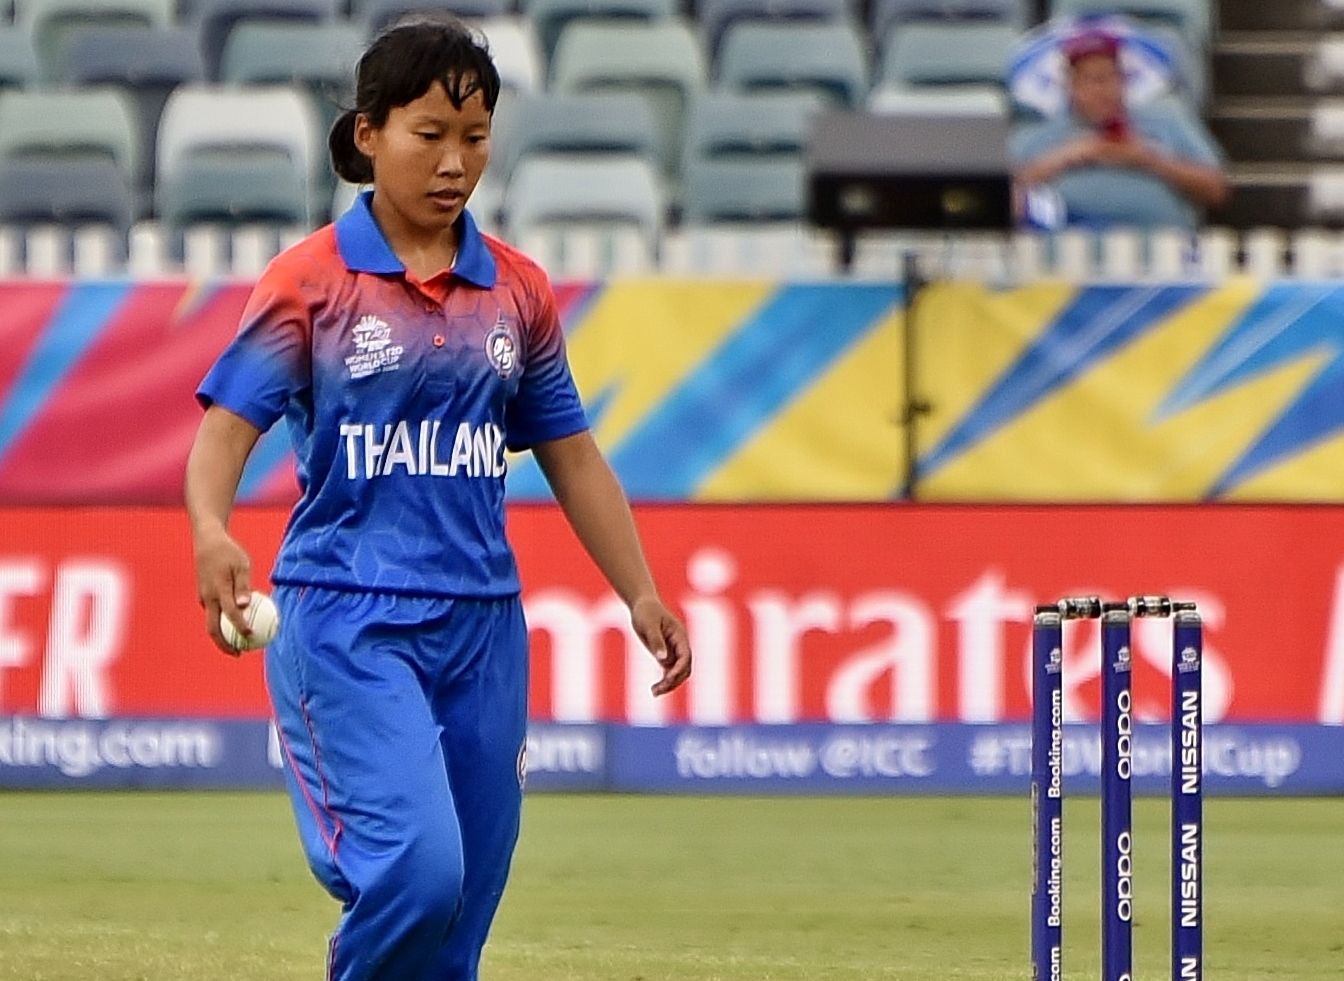 Thailand team's bowler preparing for her bowling action